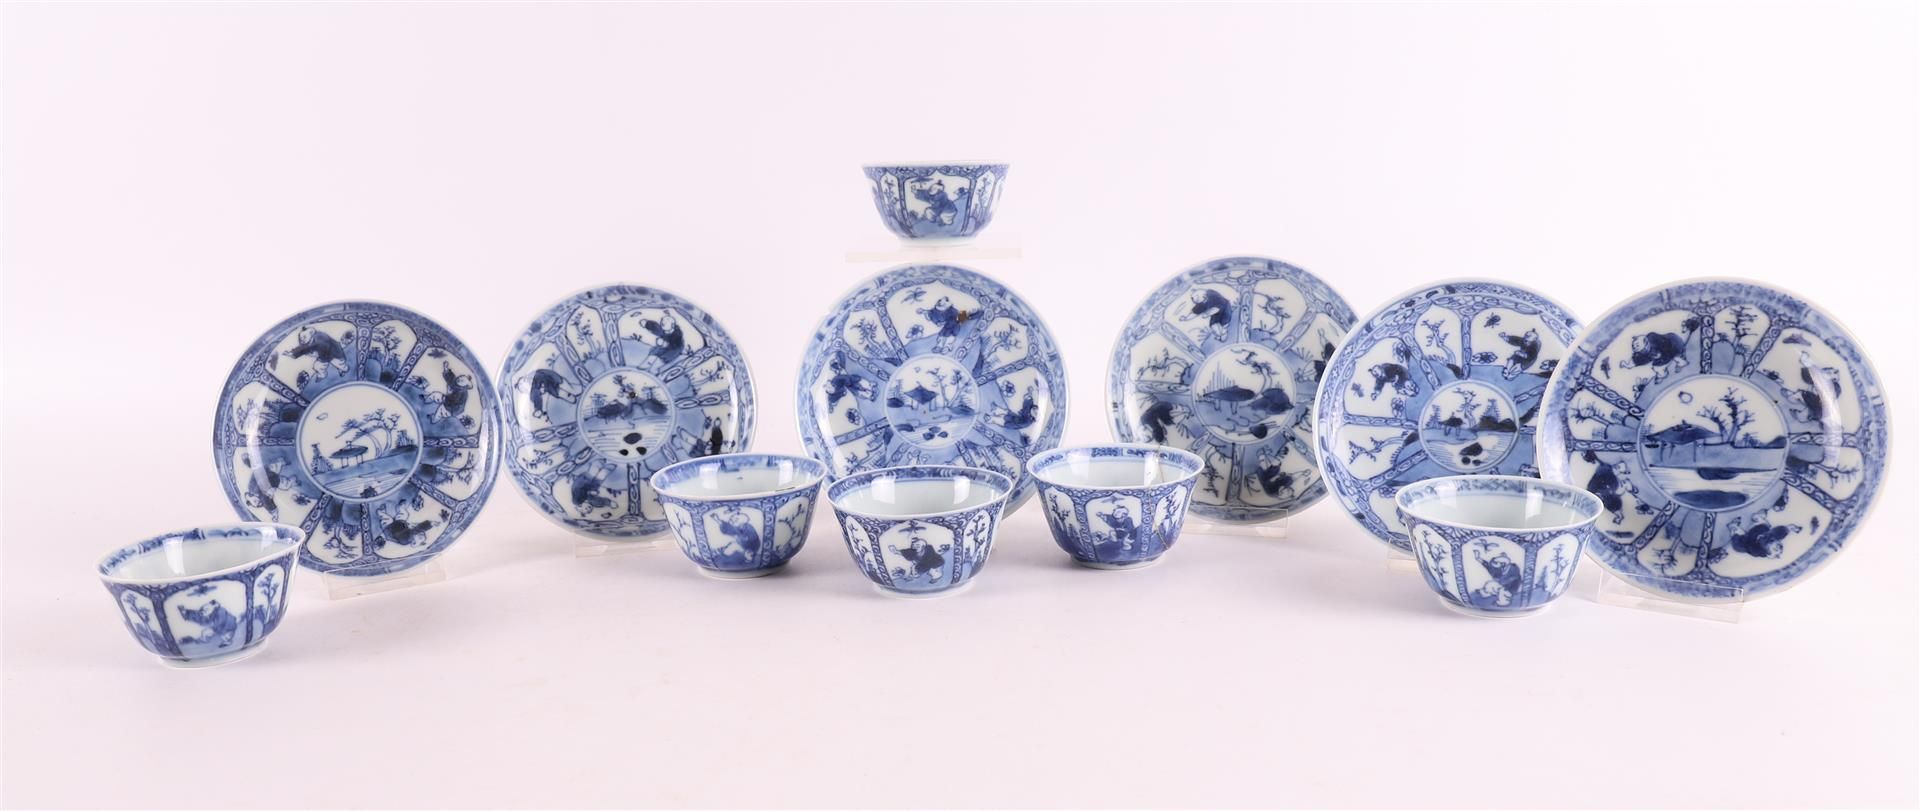 Six blue/white porcelain cups and saucers, China, Kangxi, around 1700.